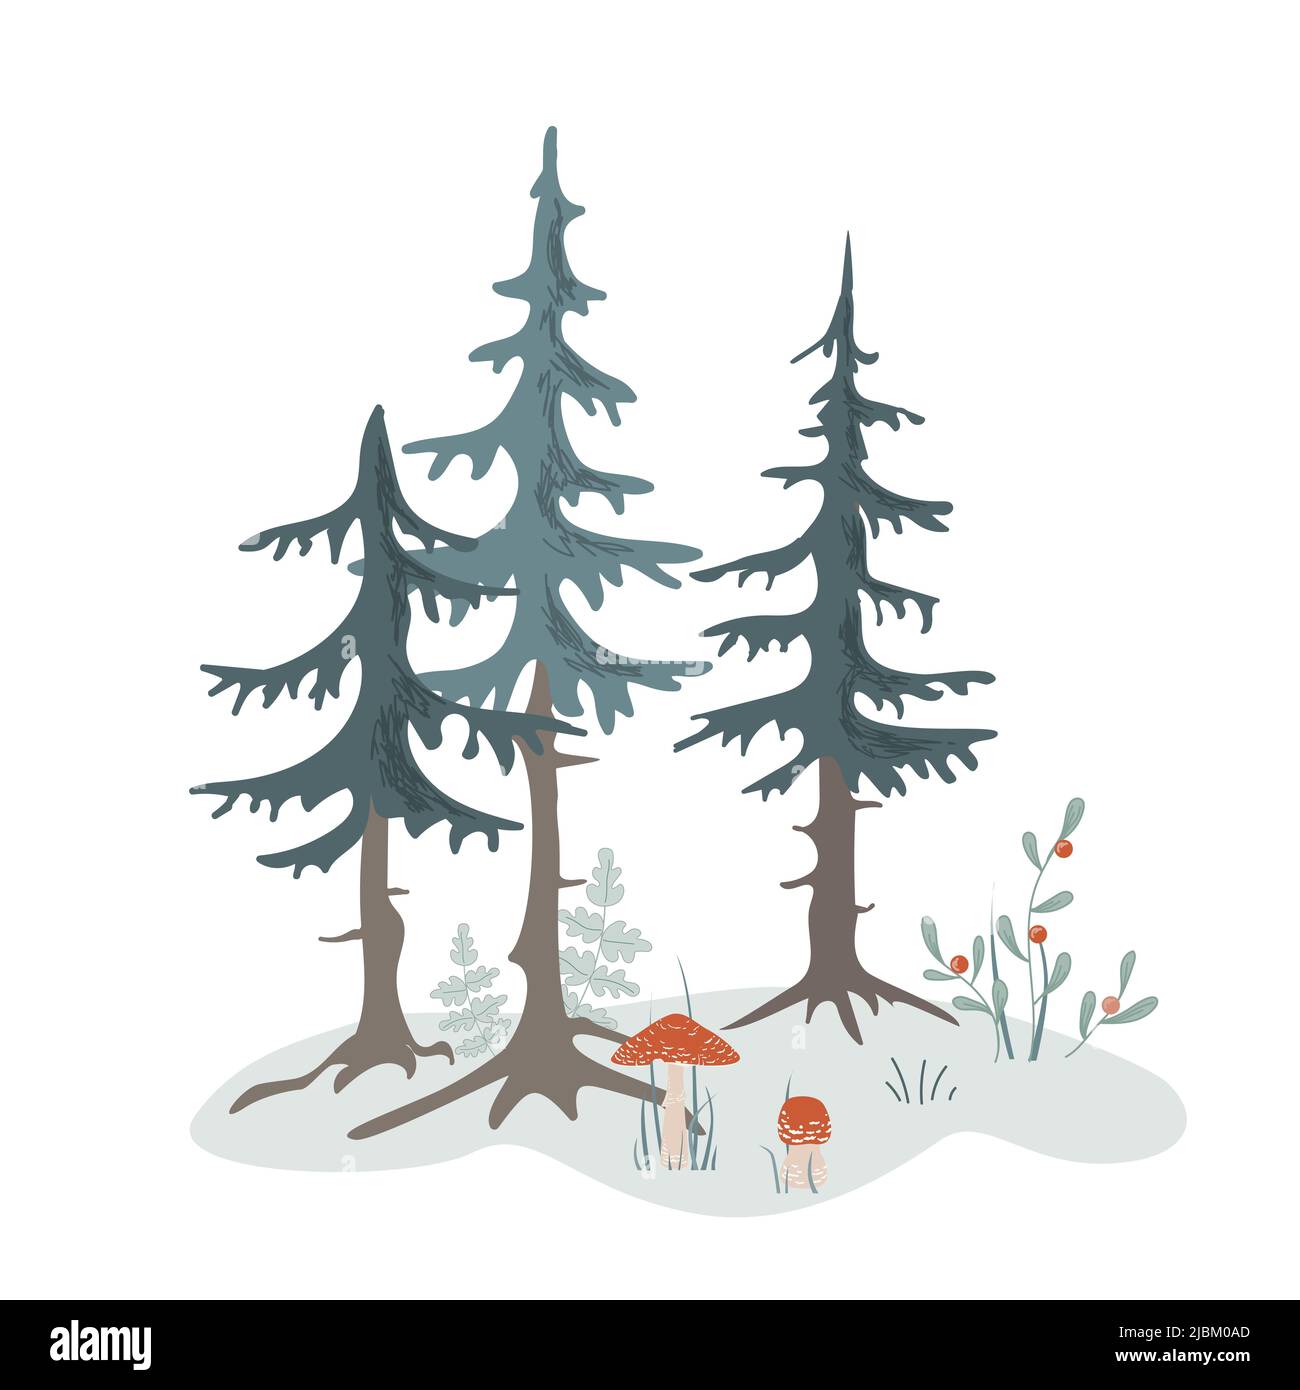 Forest composition. Fir trees, herbs, and mushrooms. Design for kids cards, forest card invitation, prints. Banner decor design vector illustration. Stock Vector